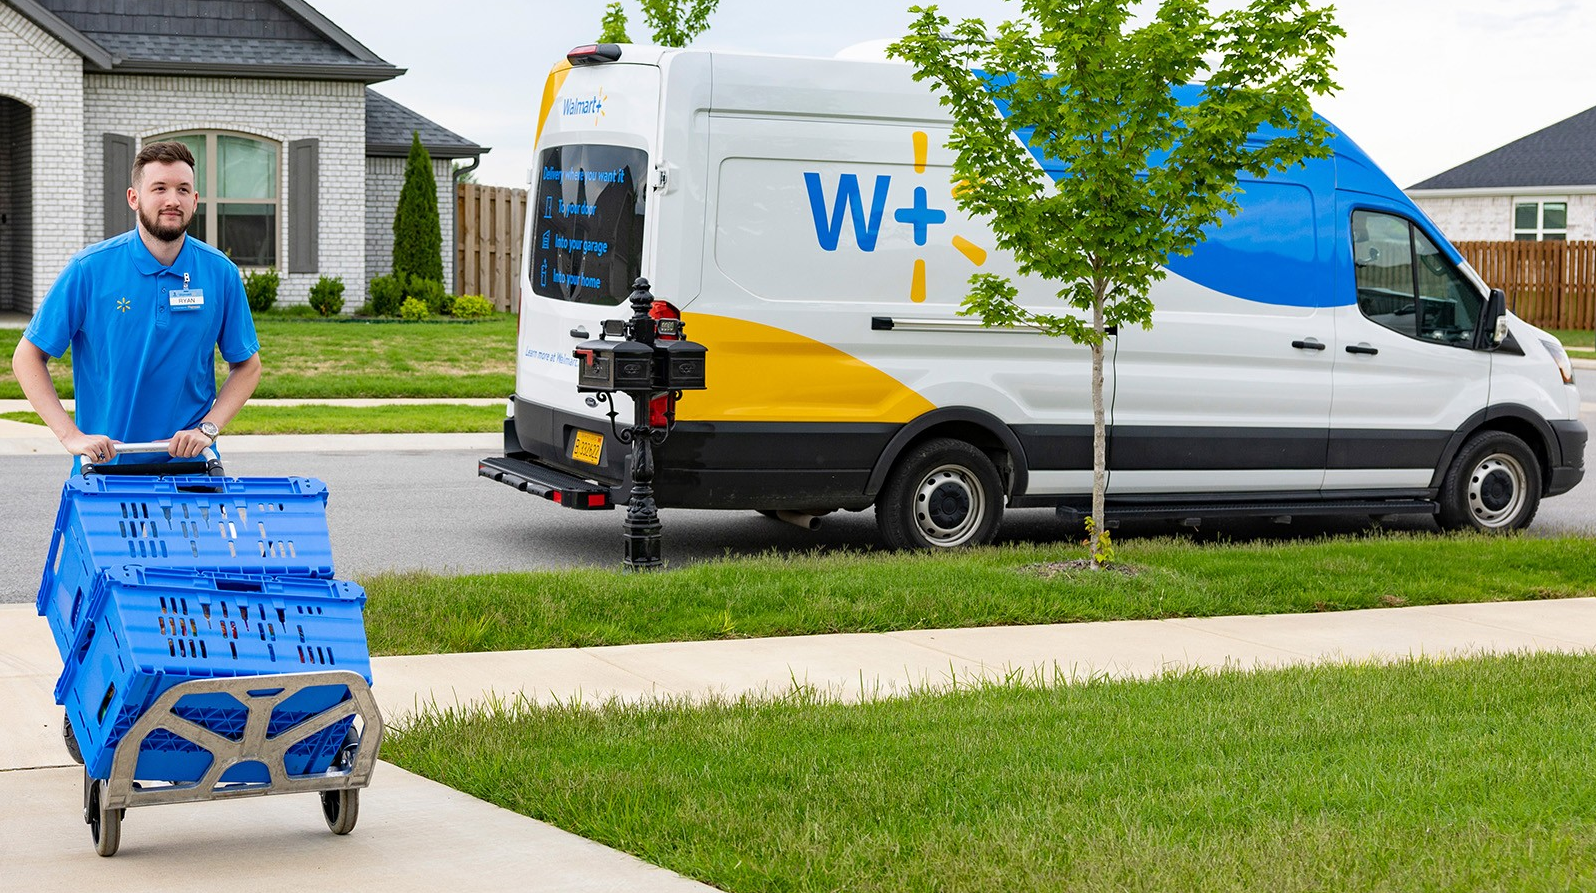 An associate is shown pushing a dolly with two blue bins up a driveway. A Walmart van is parked at the curb